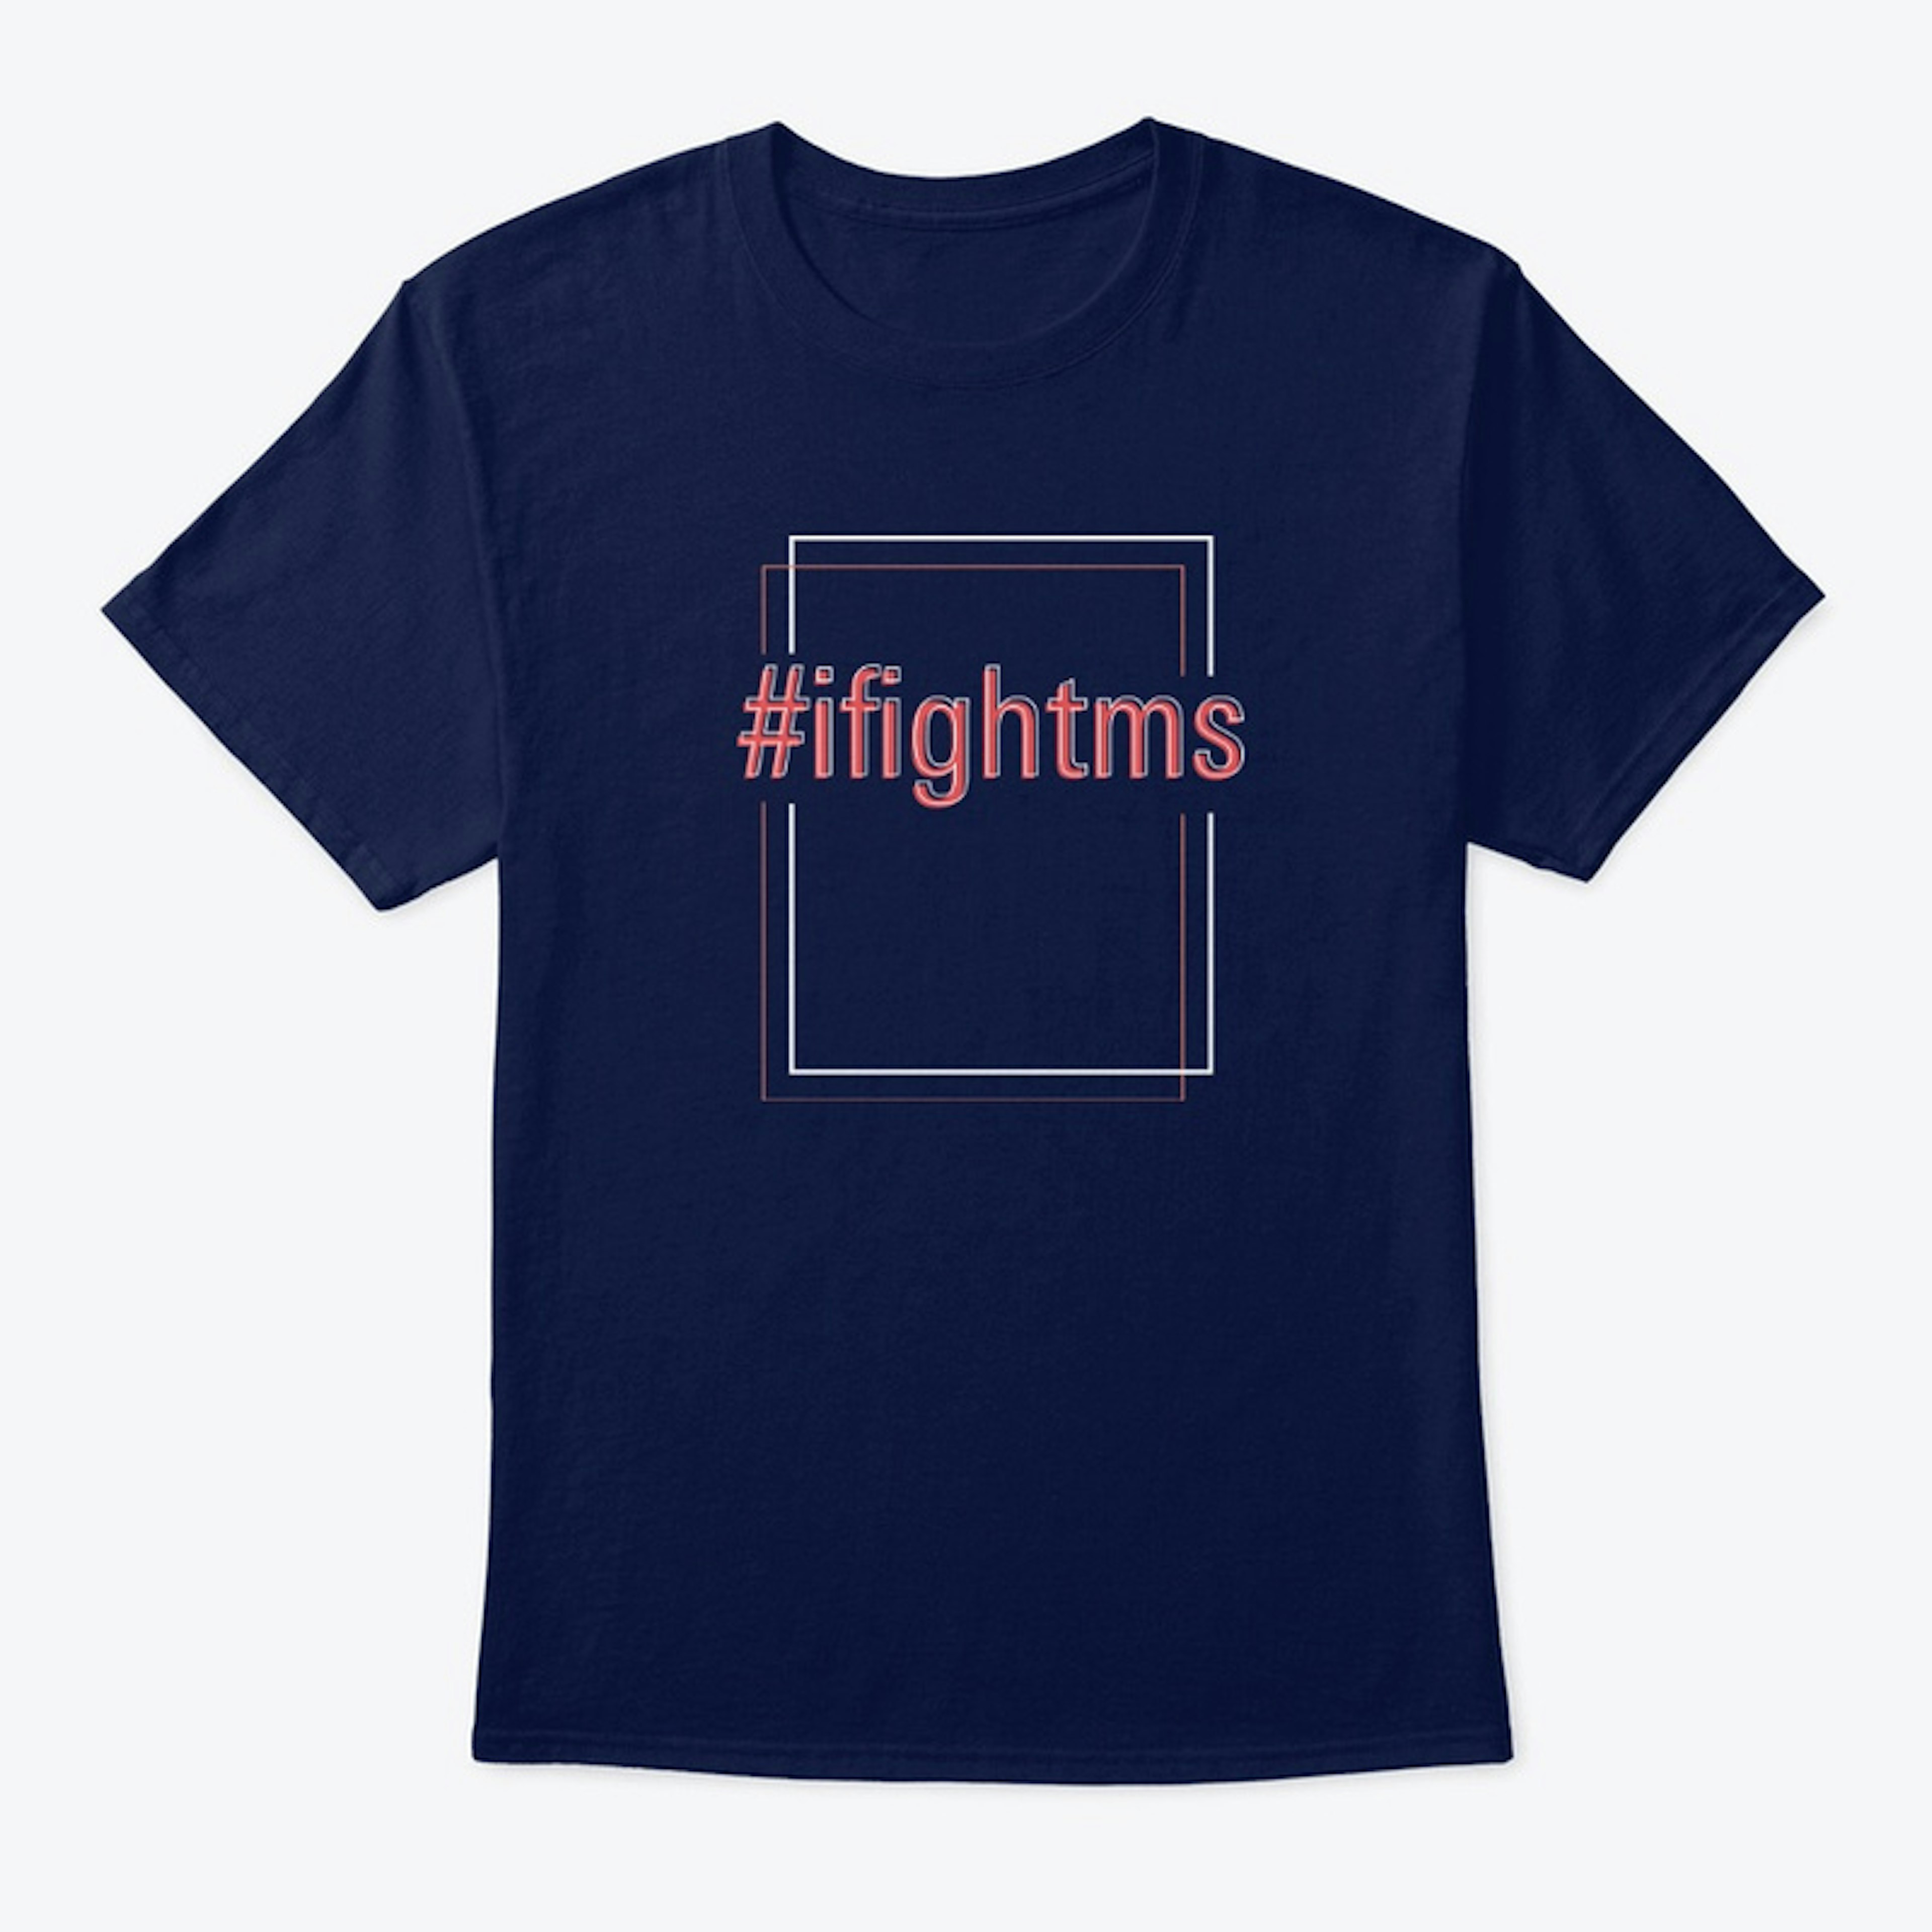 iFightMS